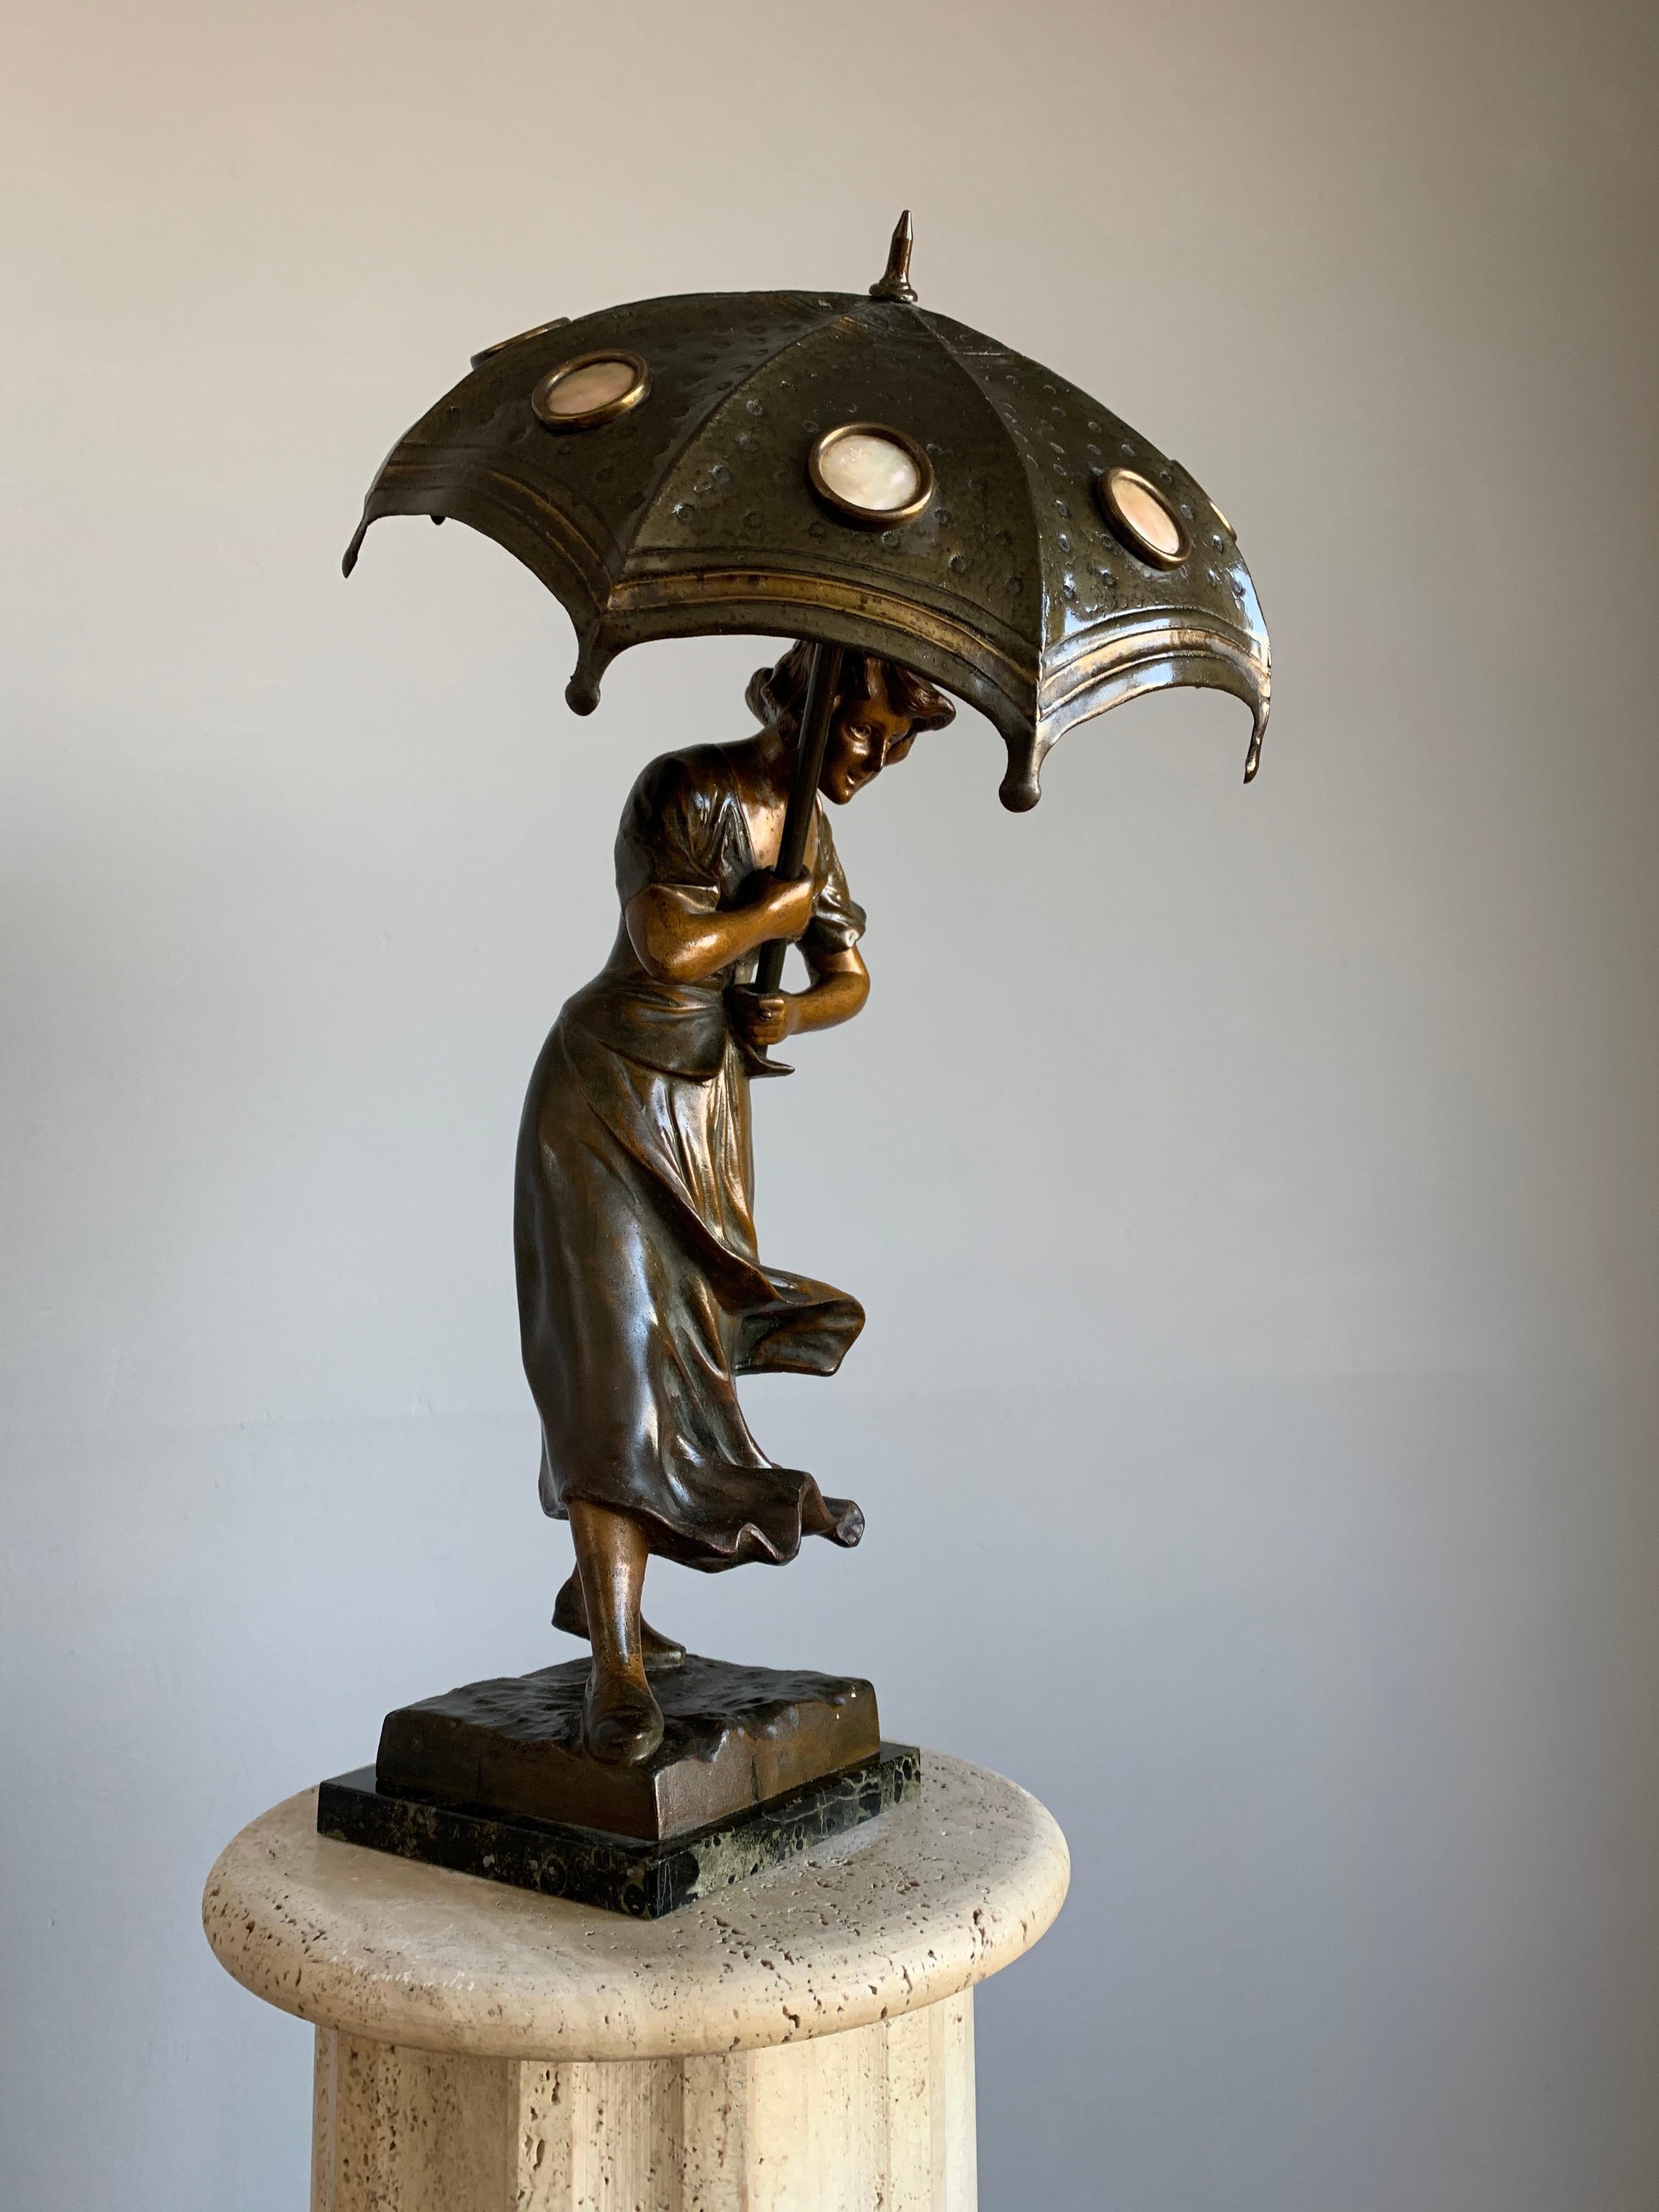 Stunning Art Deco Sculpture Desk or Table Lamp, Girl with Umbrella in the Wind 1